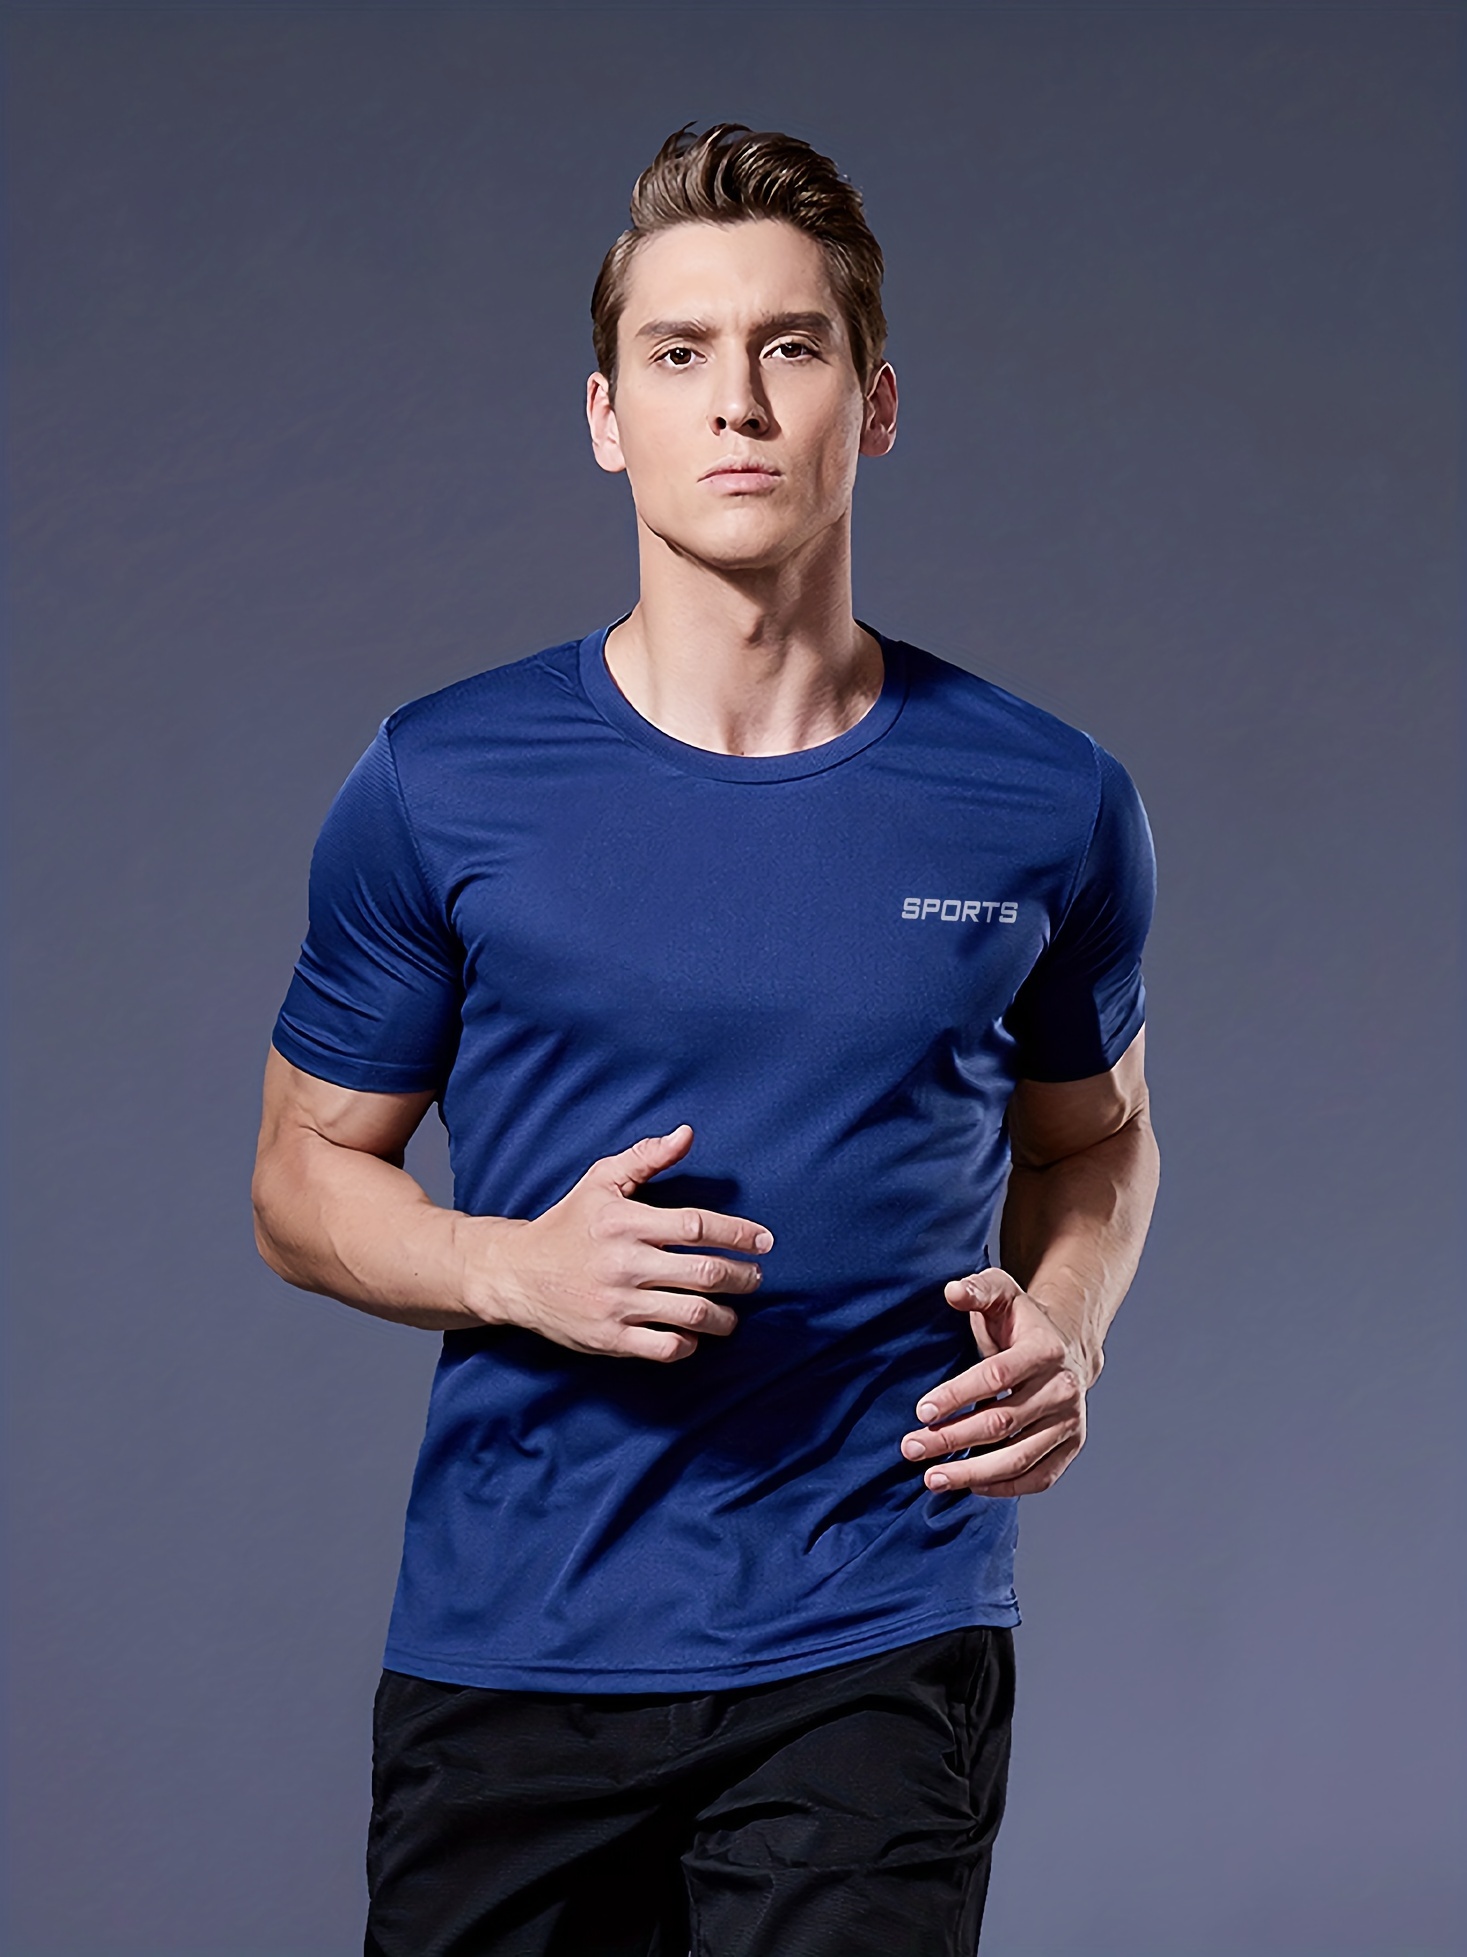 Breathable Quick Dry Men's Sports & Outdoor Training T Shirt - Men's  Fitness Apparel, Men's Sports & Fitness T Shirts, Vivinch